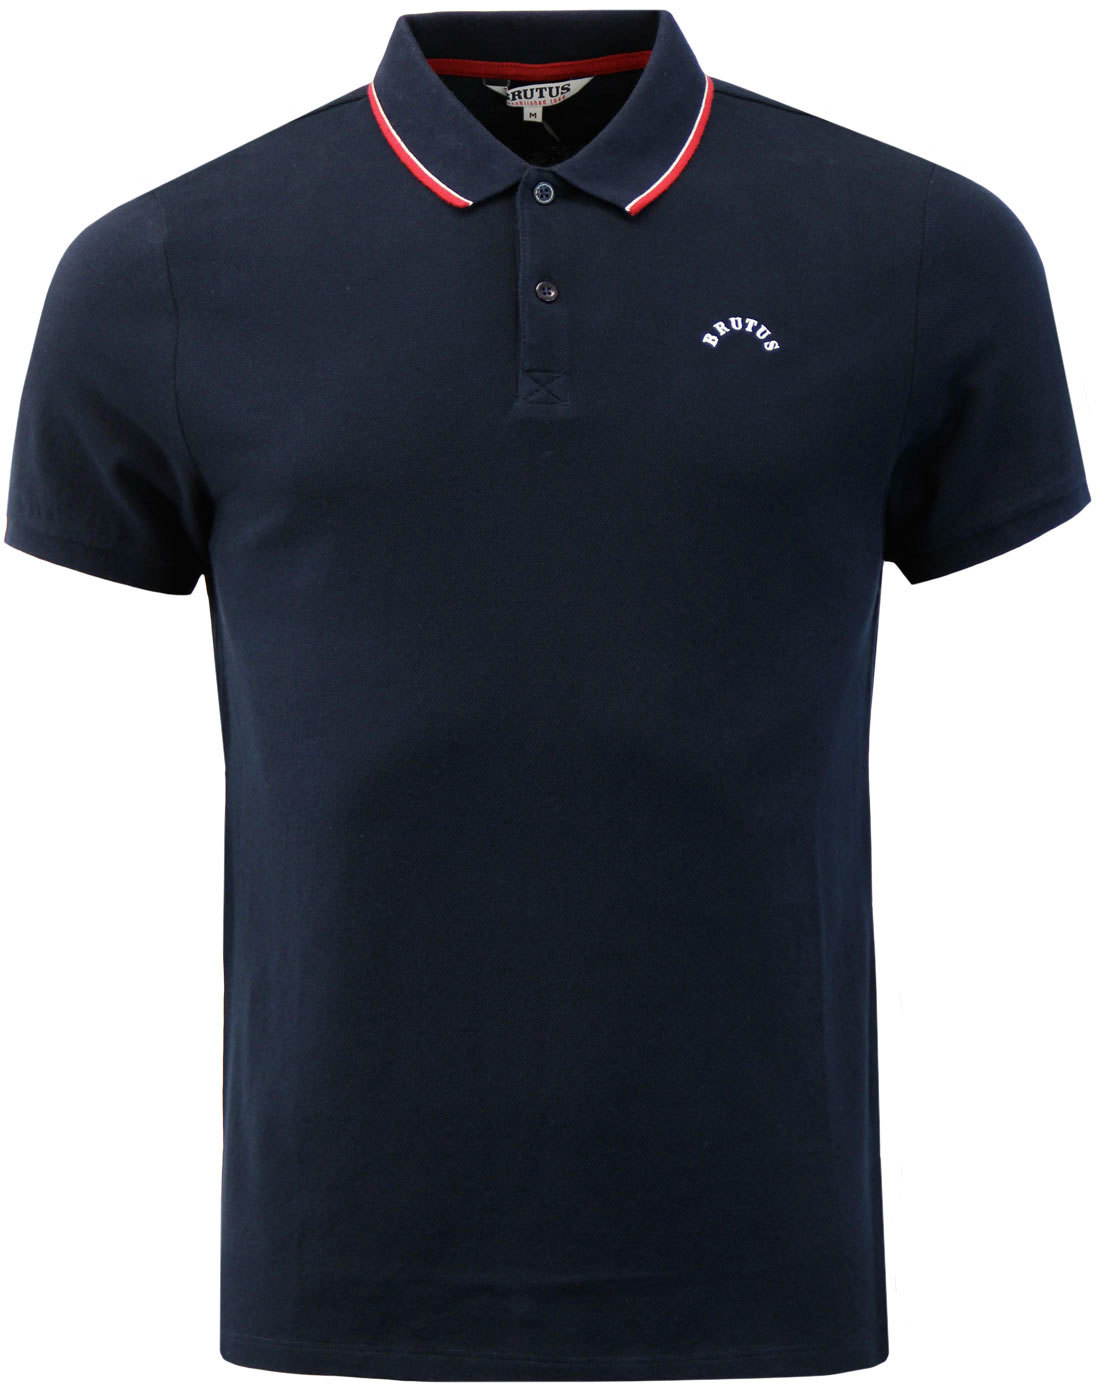 BRUTUS TRIMFIT Retro Mod Twin Tipped Pique Polo Shirt in Navy